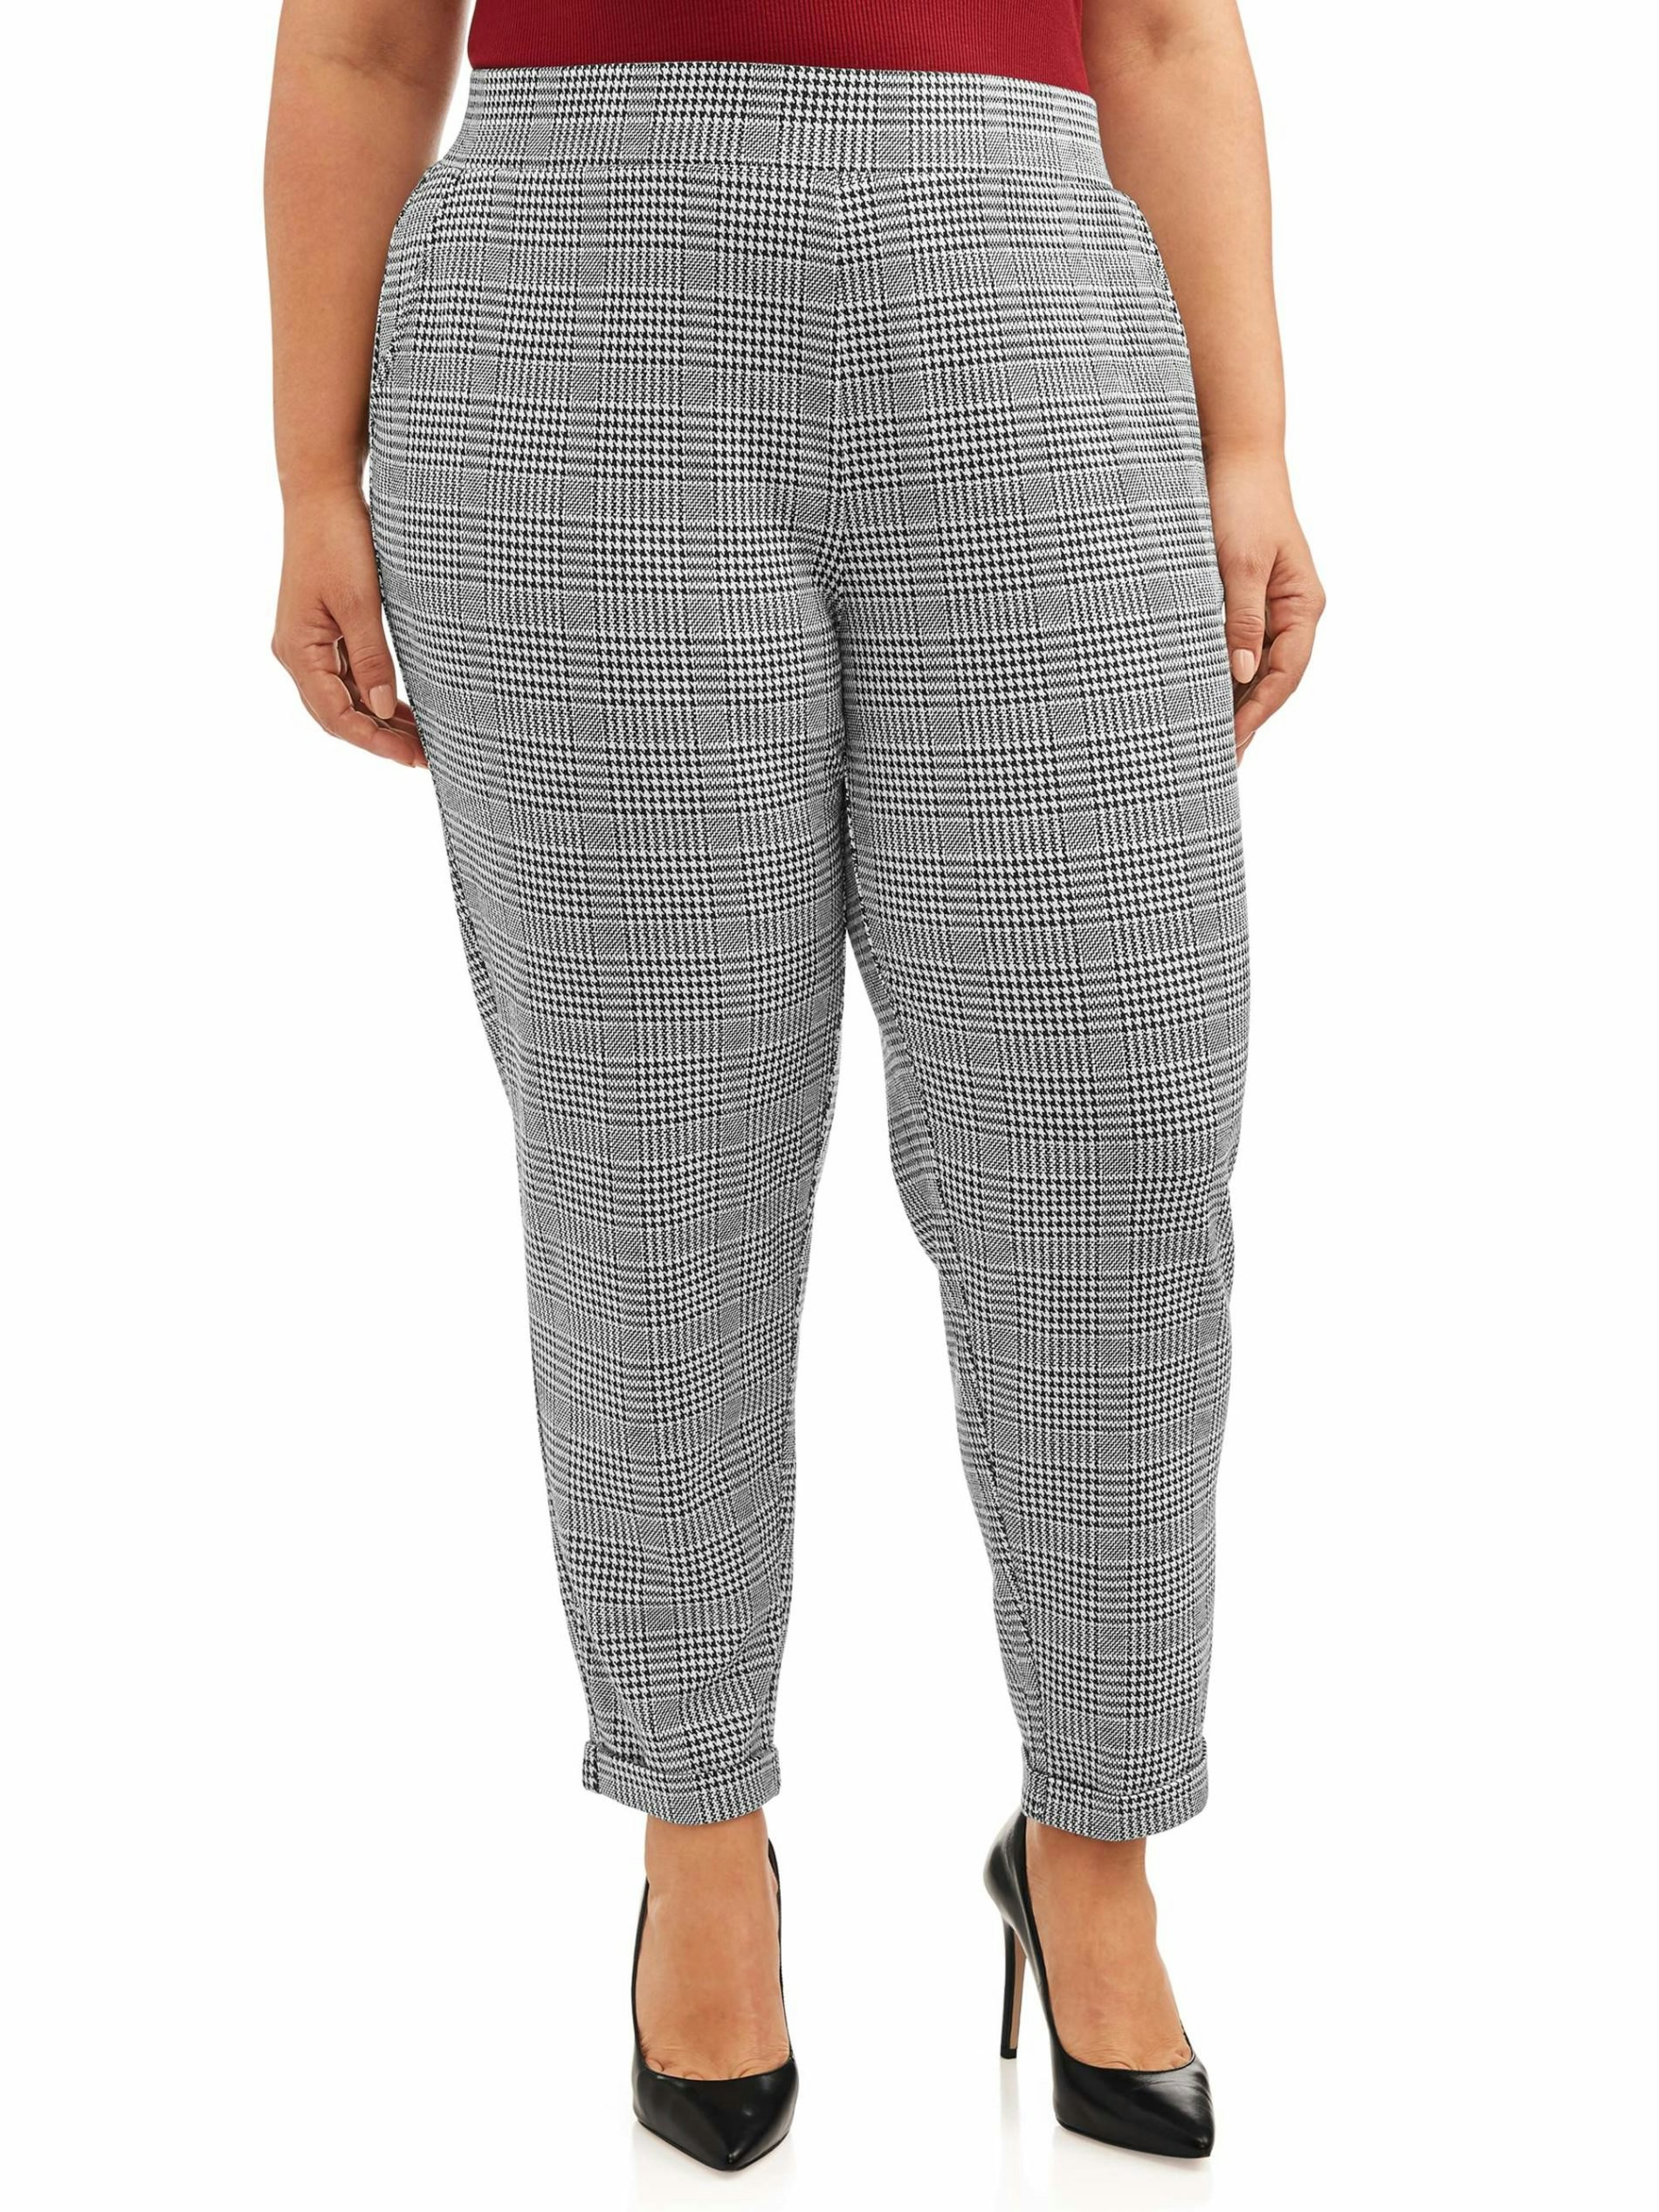 https://imgix.bustle.com/scary-mommy/2019/10/Terra-Sky-Plus-Size-Printed-Double-Knit-Tapered-Pant.jpg